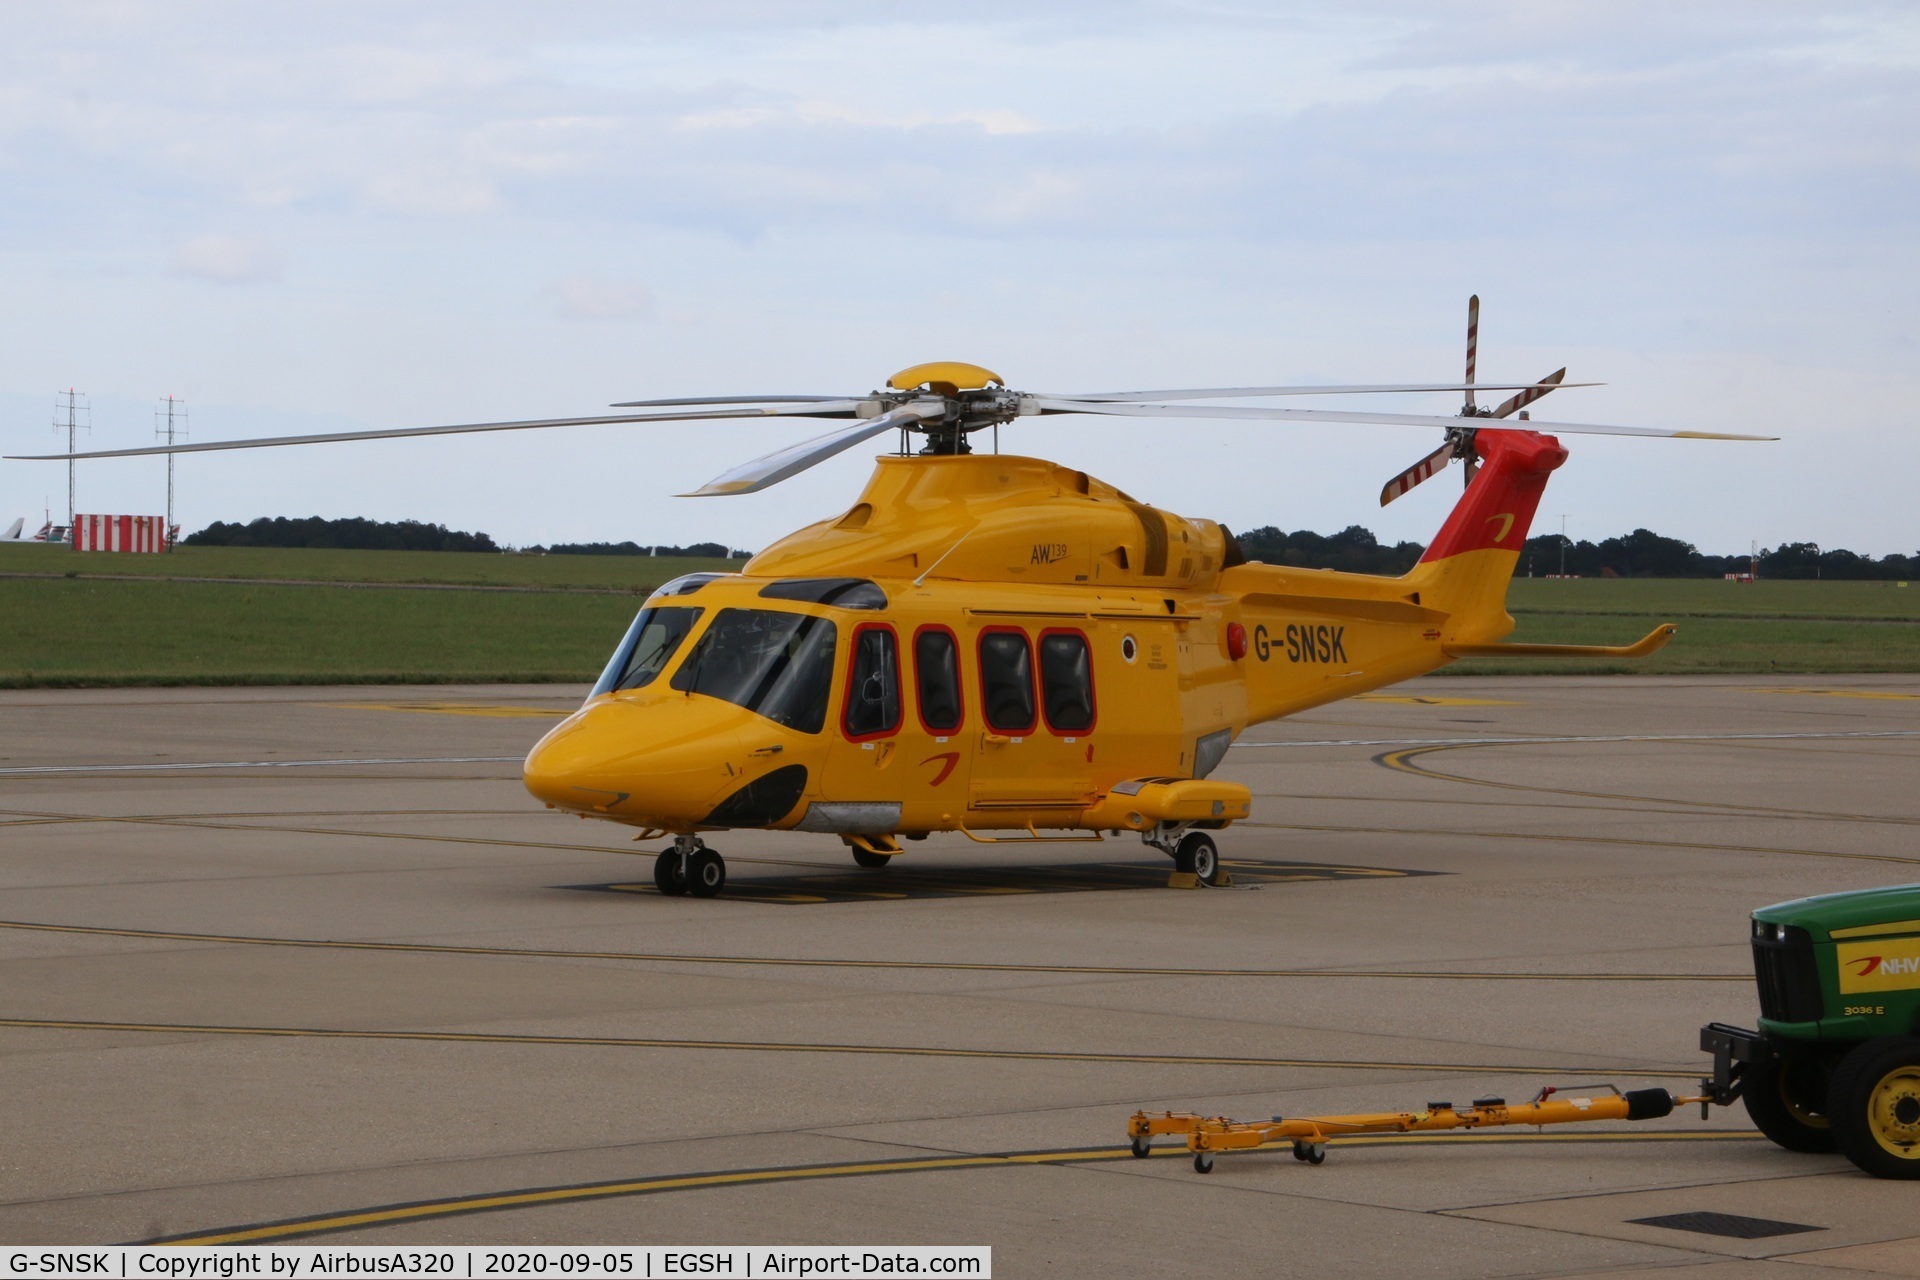 G-SNSK, 2013 AgustaWestland AW-139 C/N 41354, Parked on the Saxon ramp at Norwich